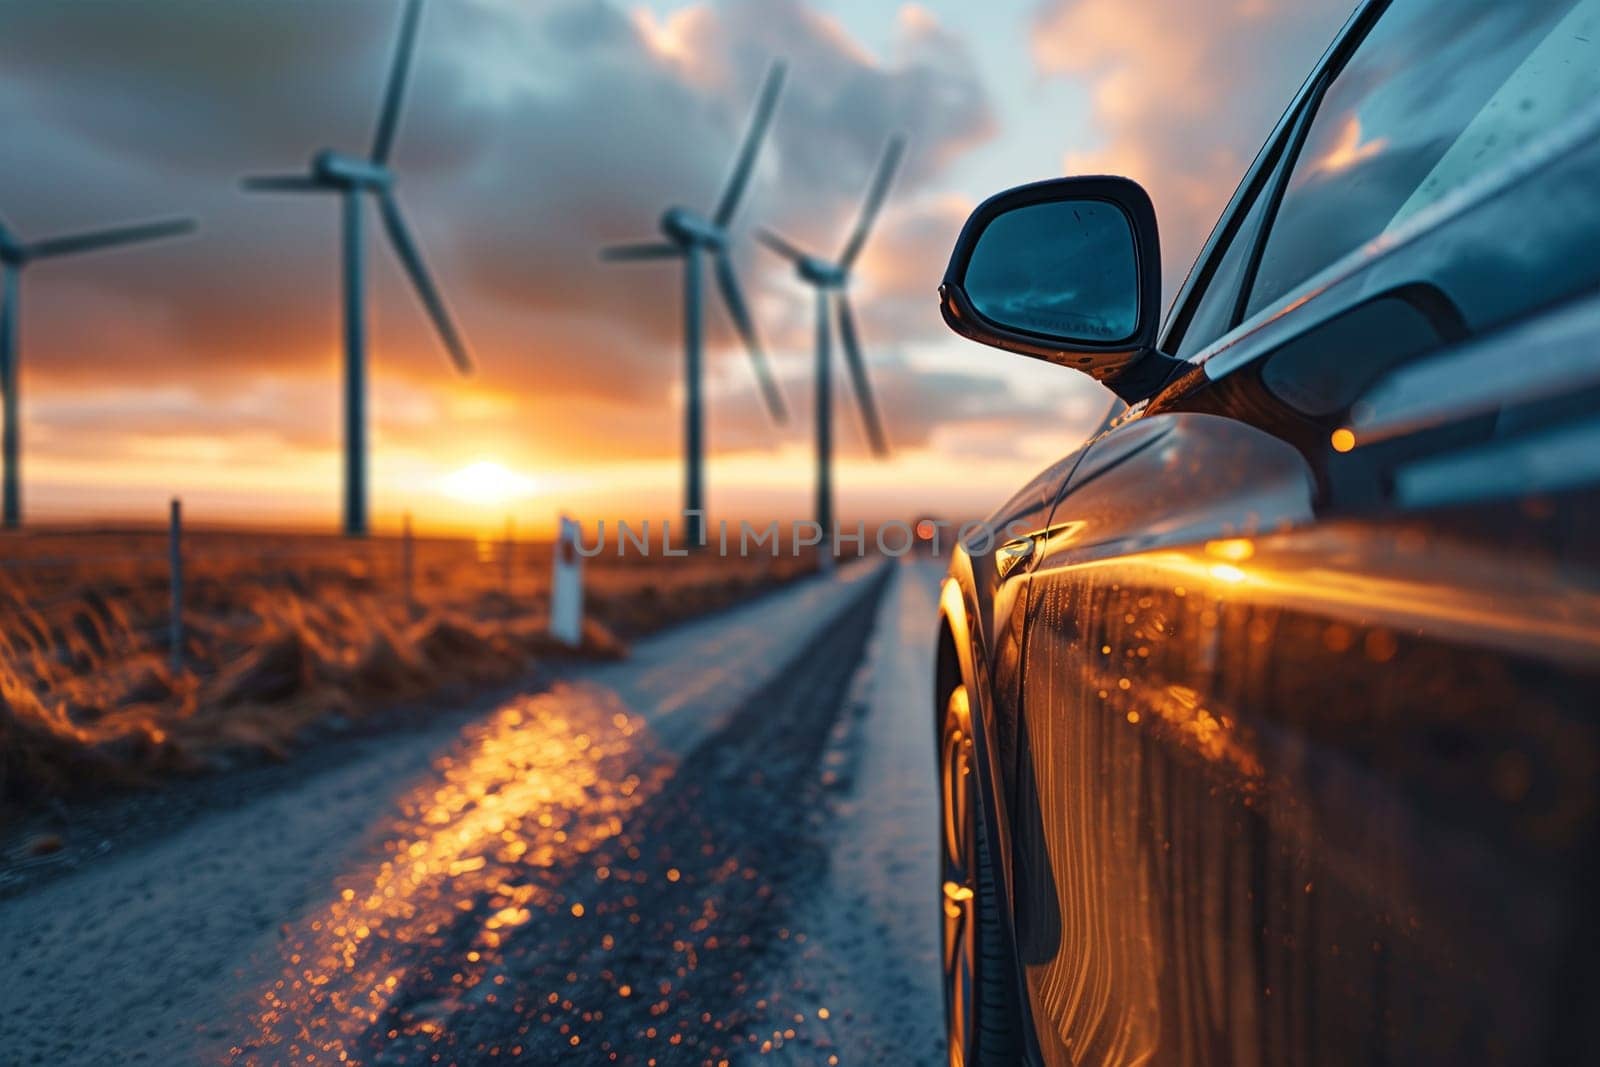 A car drives down a road lined with windmills in the countryside.